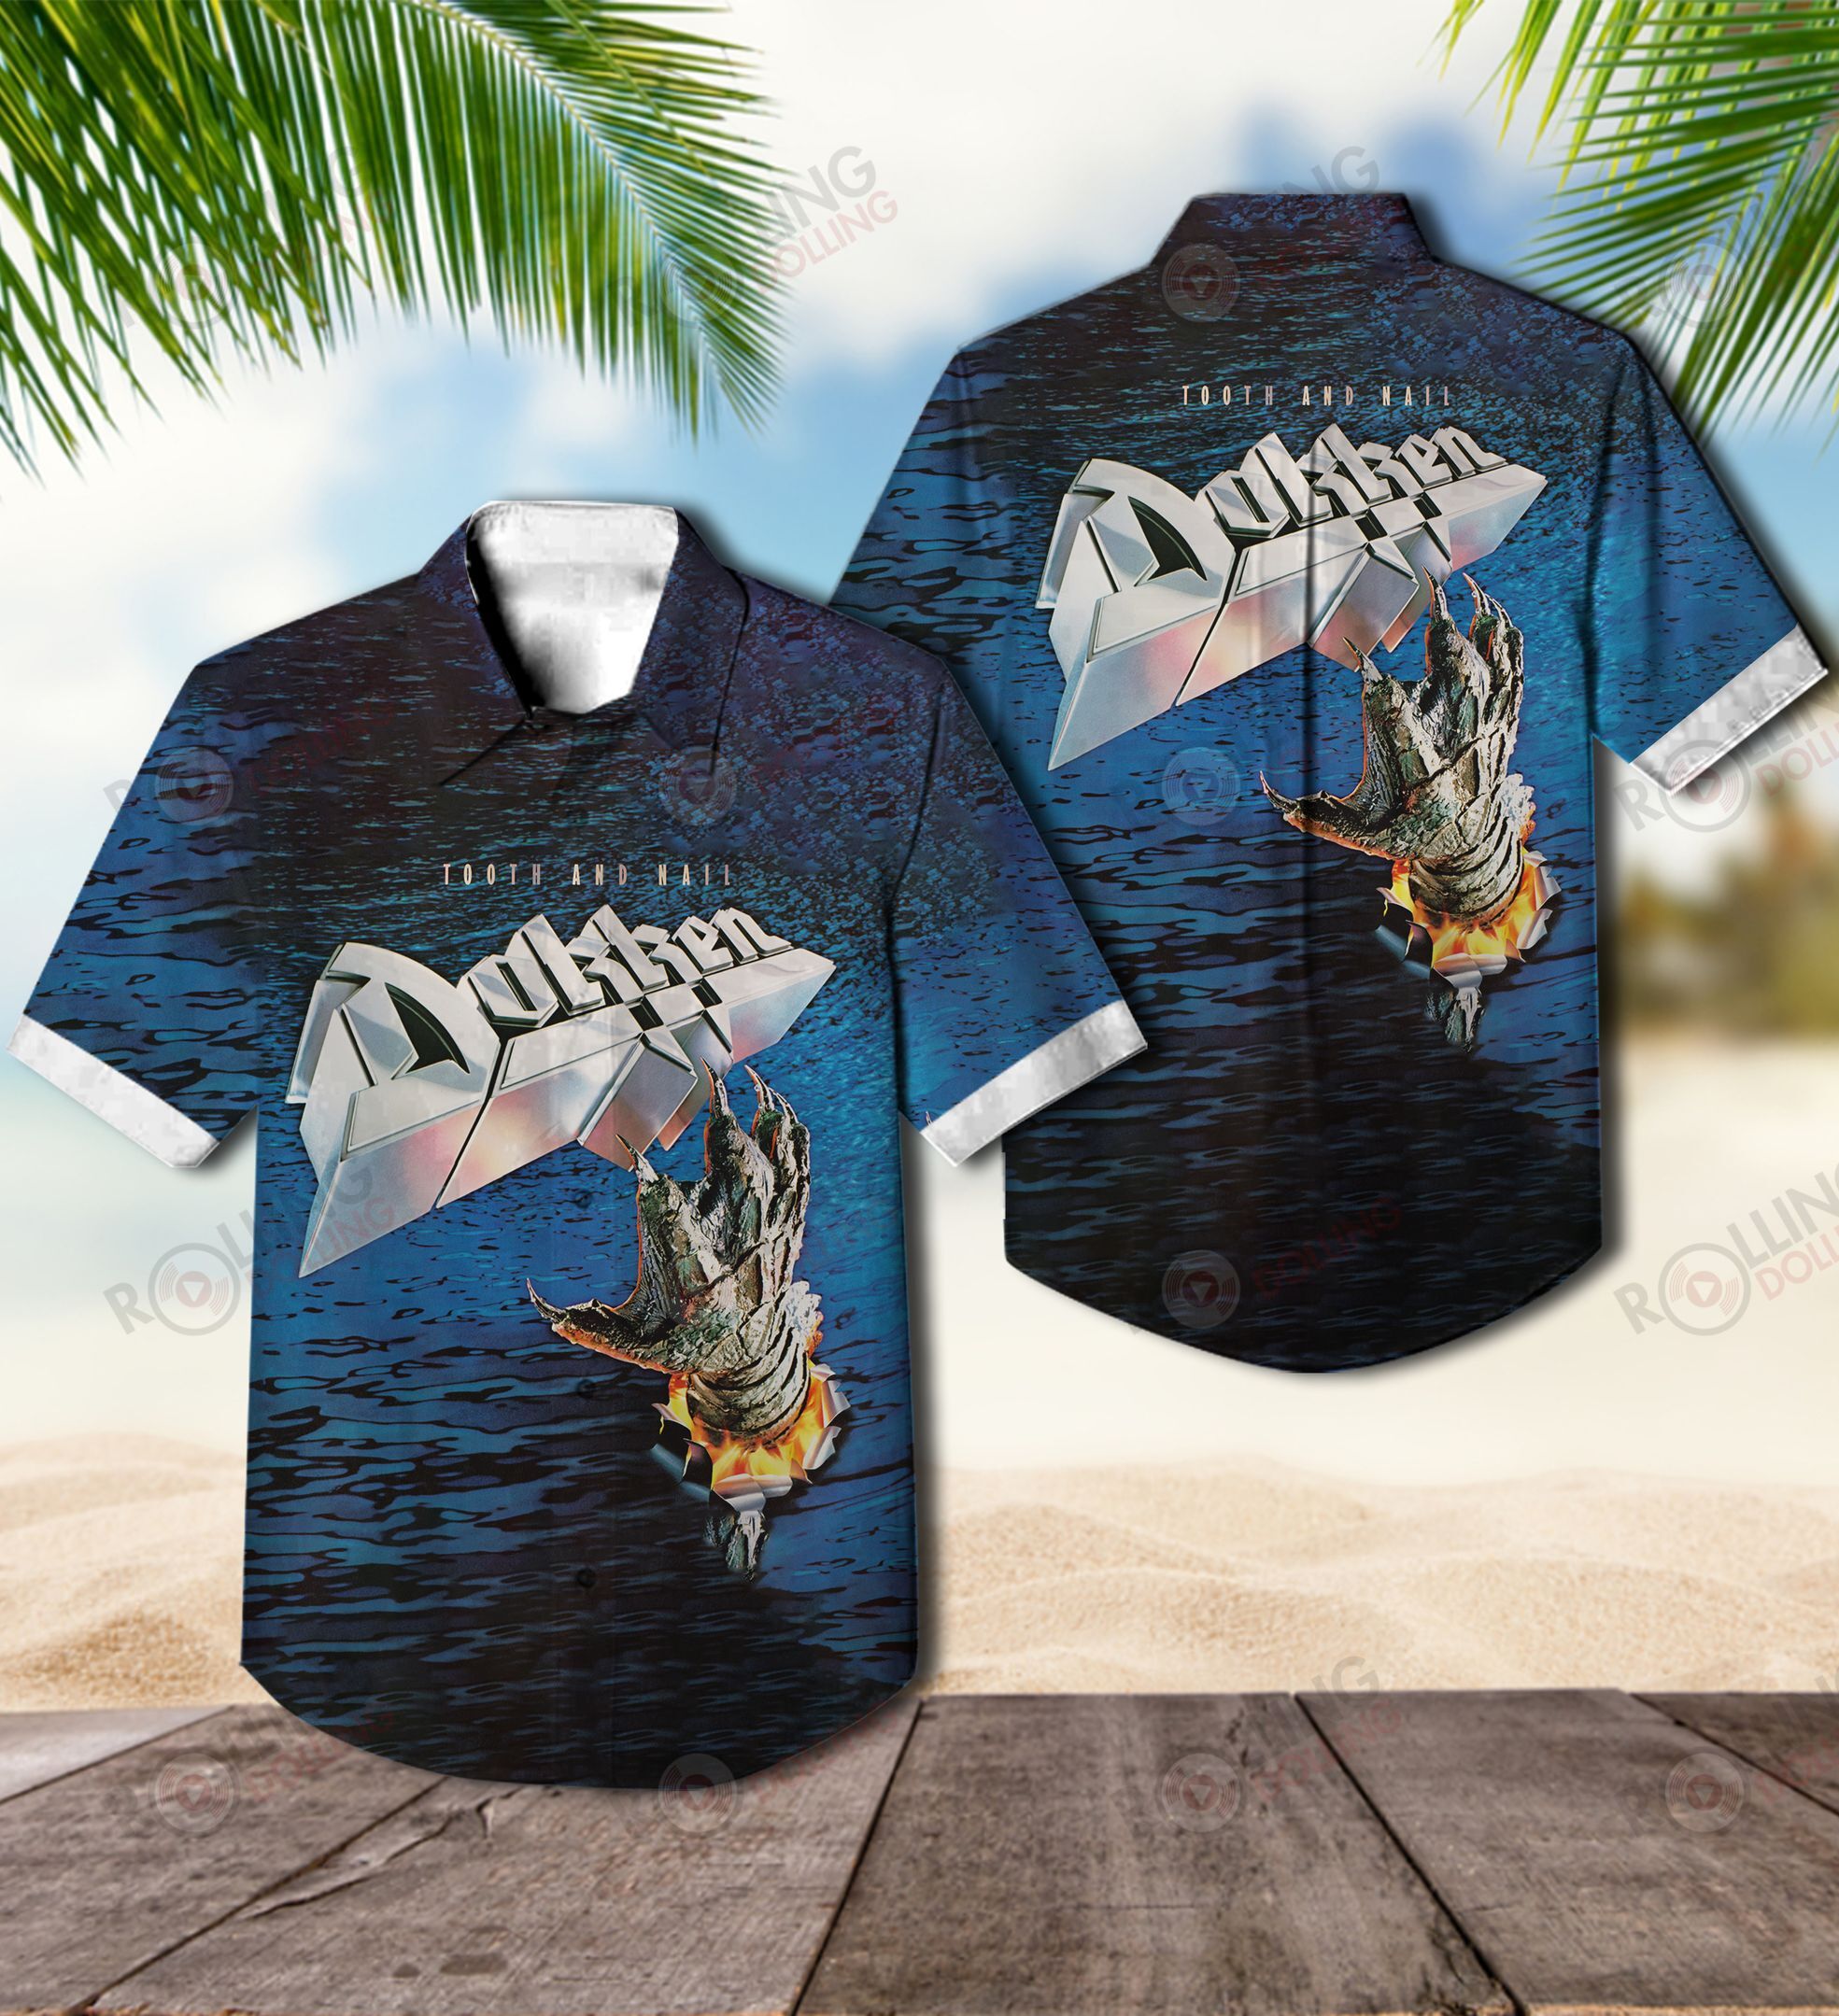 This would make a great gift for any fan who loves Hawaiian Shirt as well as Rock band 2